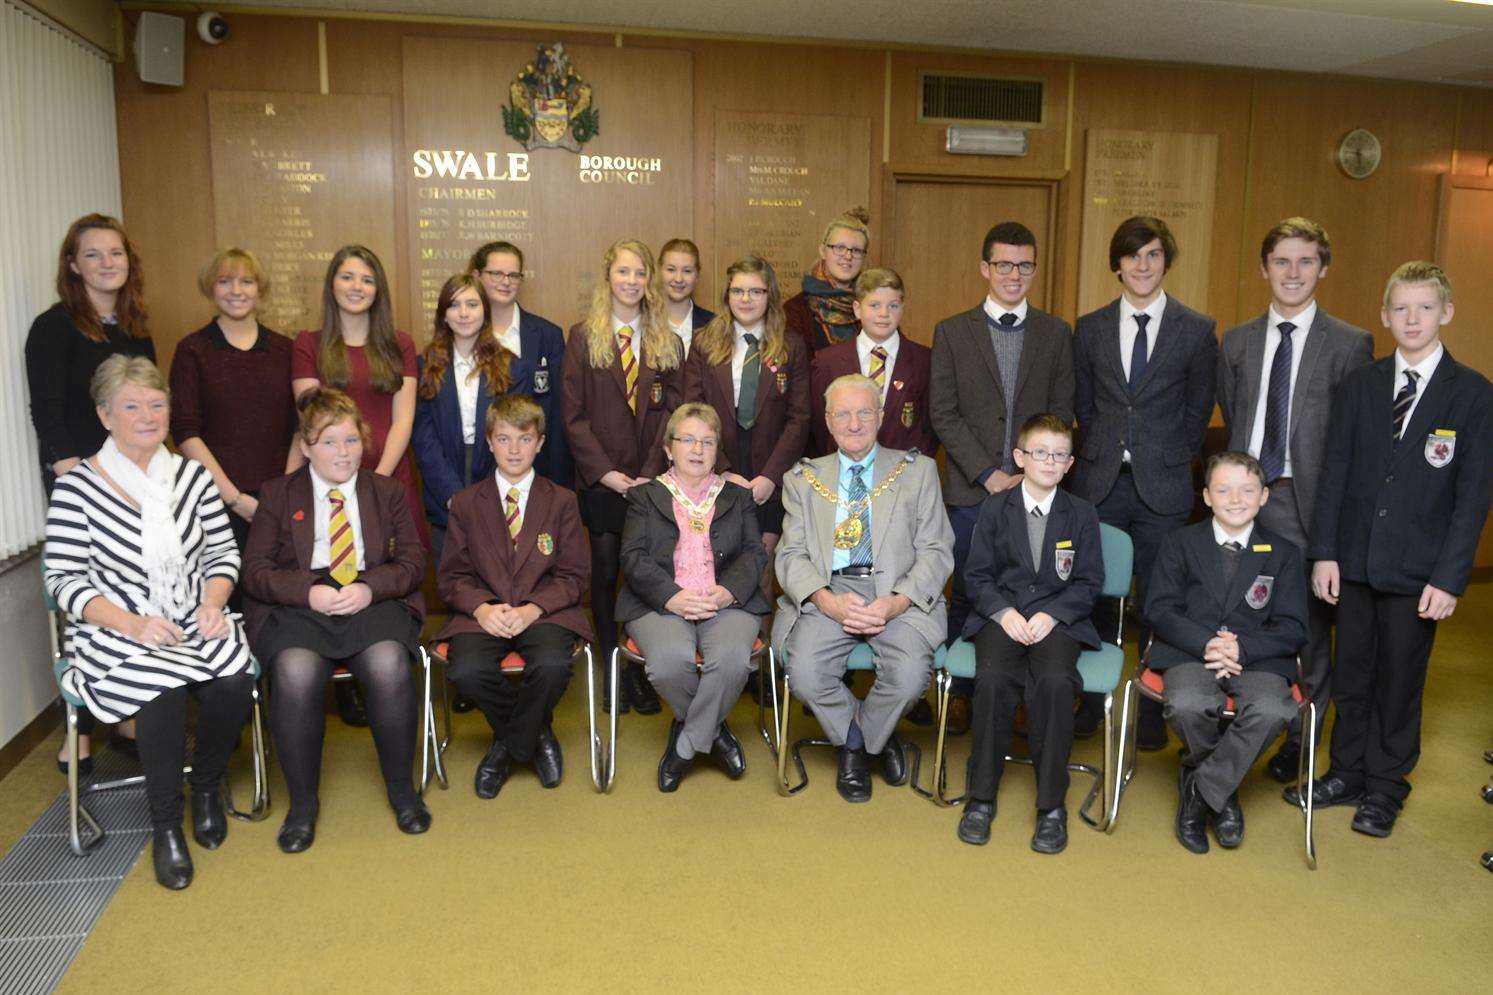 The Mayoress and Mayor (centre) Brenda and Cllr George Bobbin with delegates from various Swale Schools at the Swale Youth Forum